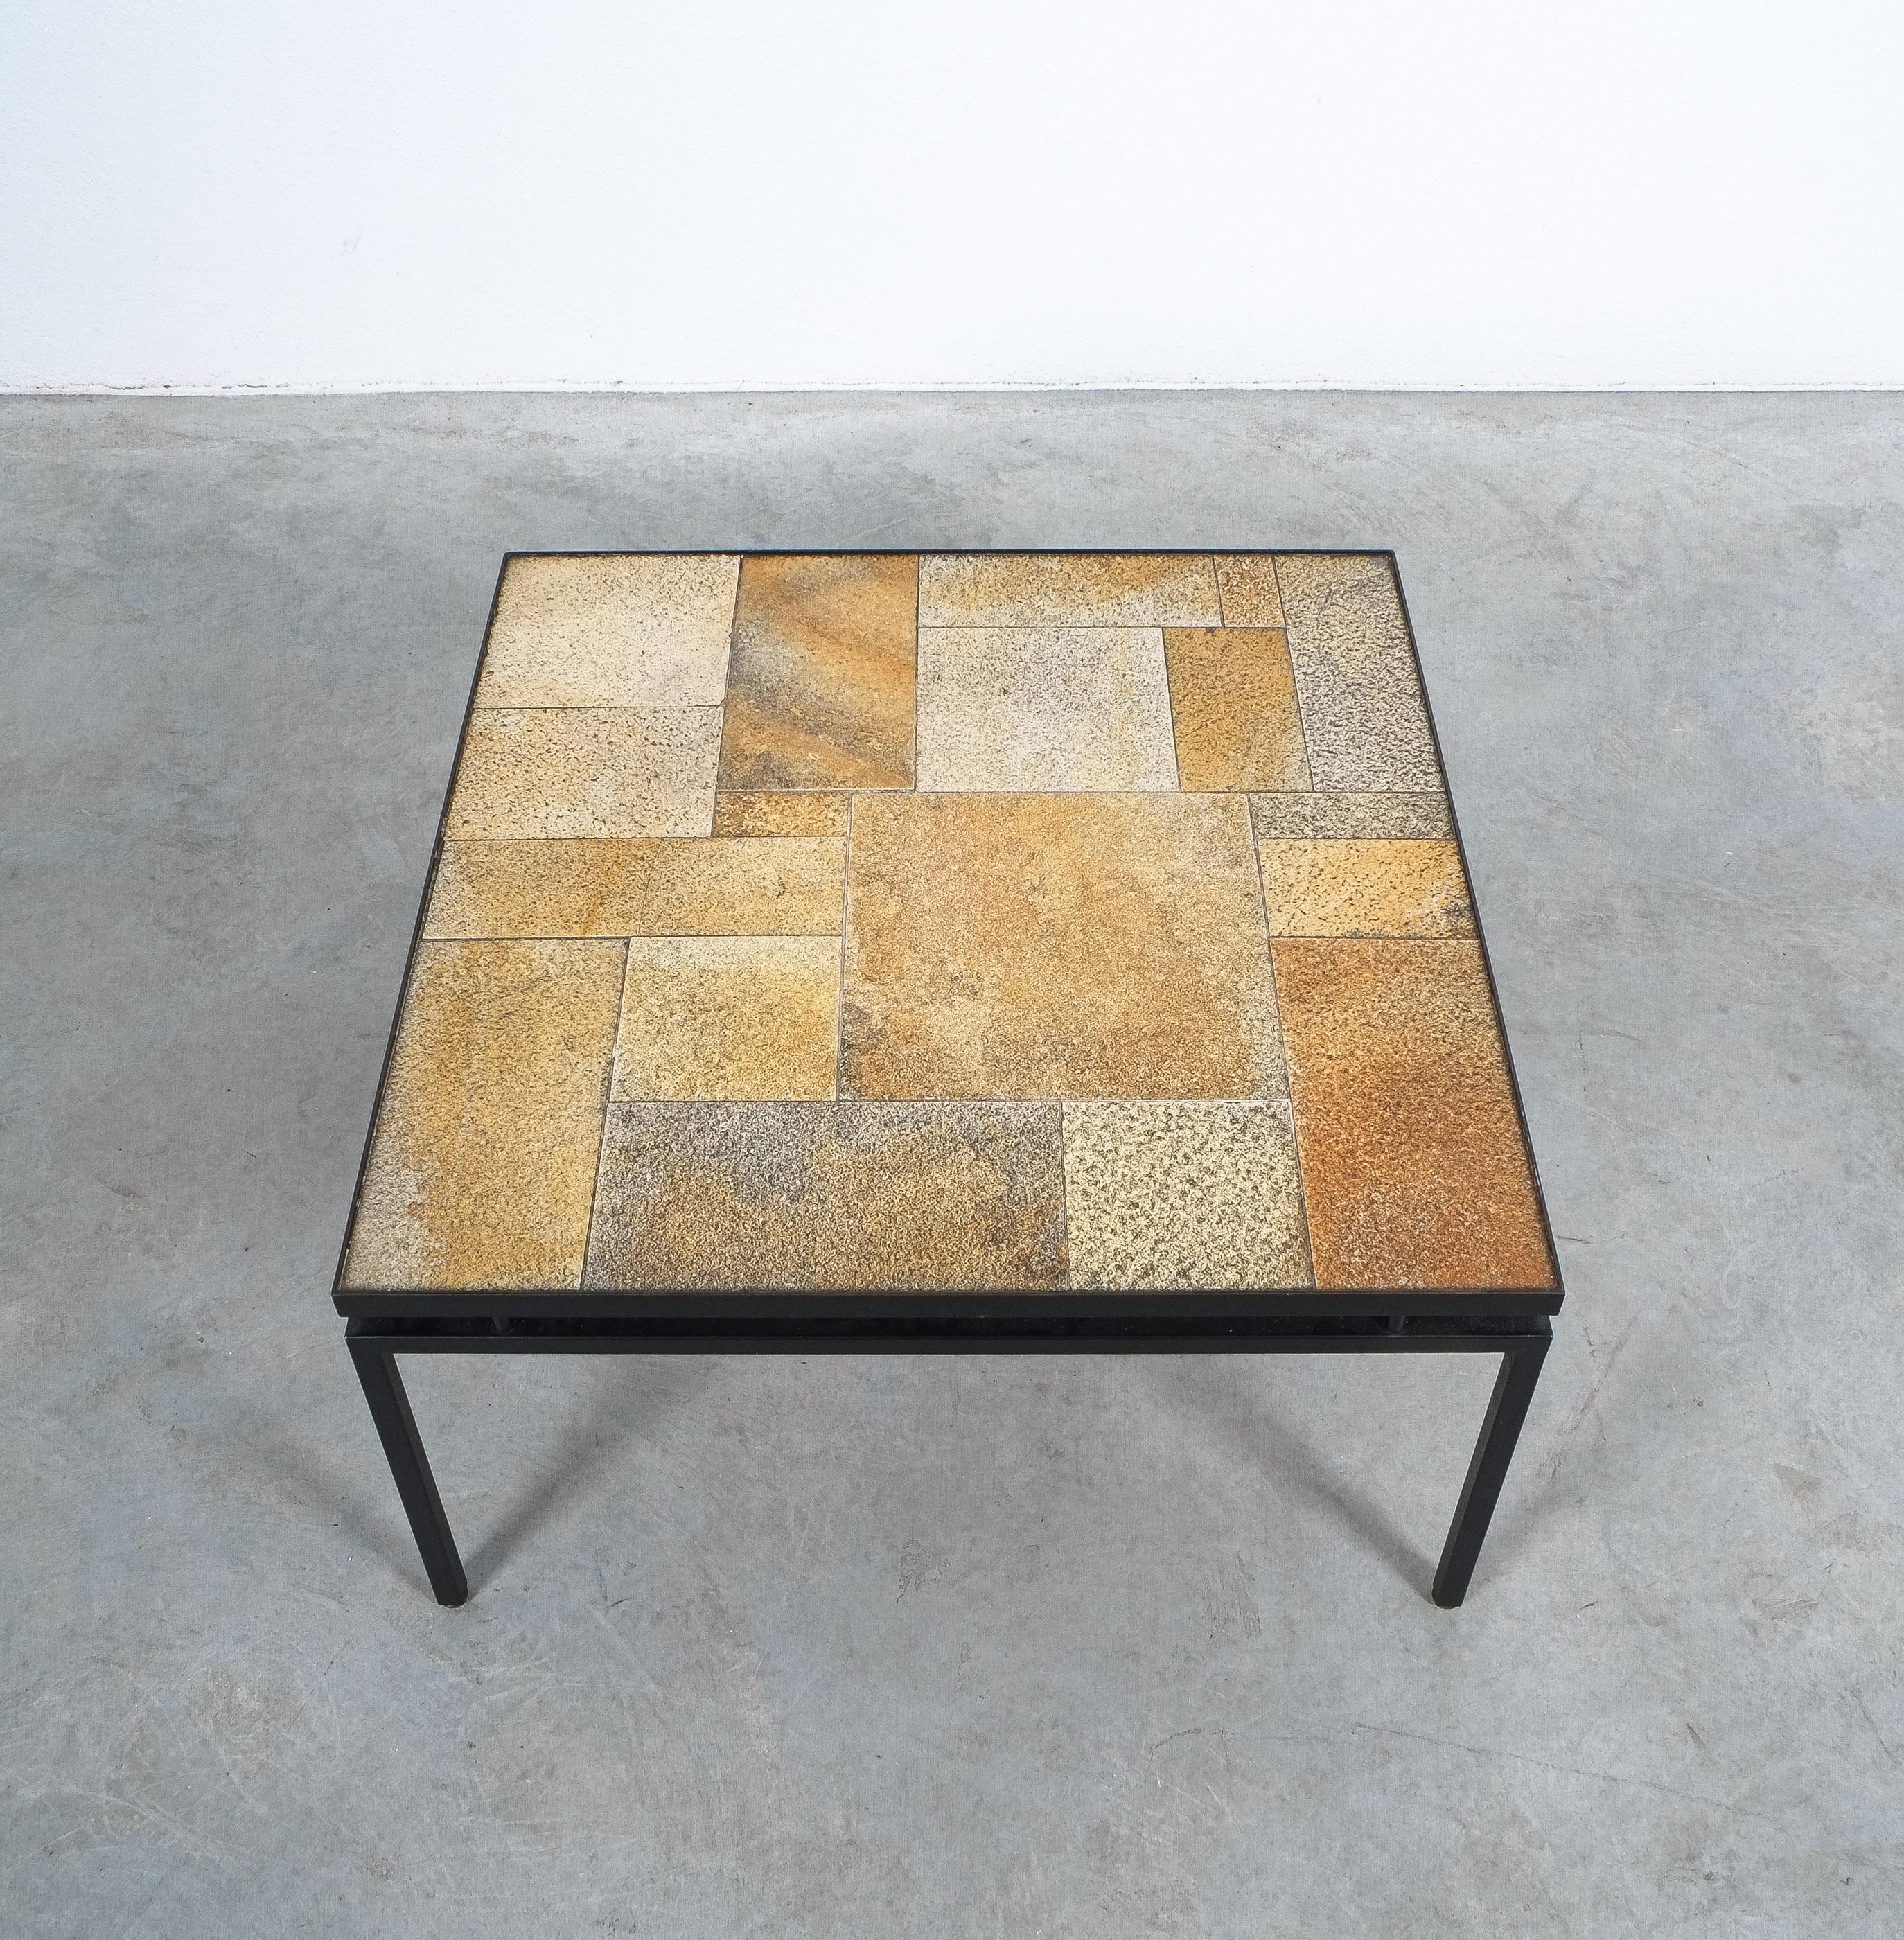 Ceramic table attributed Rogier Vandeweghe for Amphora, Belgium circa 1970

A very well balanced and harmonic table from ceramic tiles in good condition. The table top sits on a floating black lacquered iron frame. Handcrafted and in very good